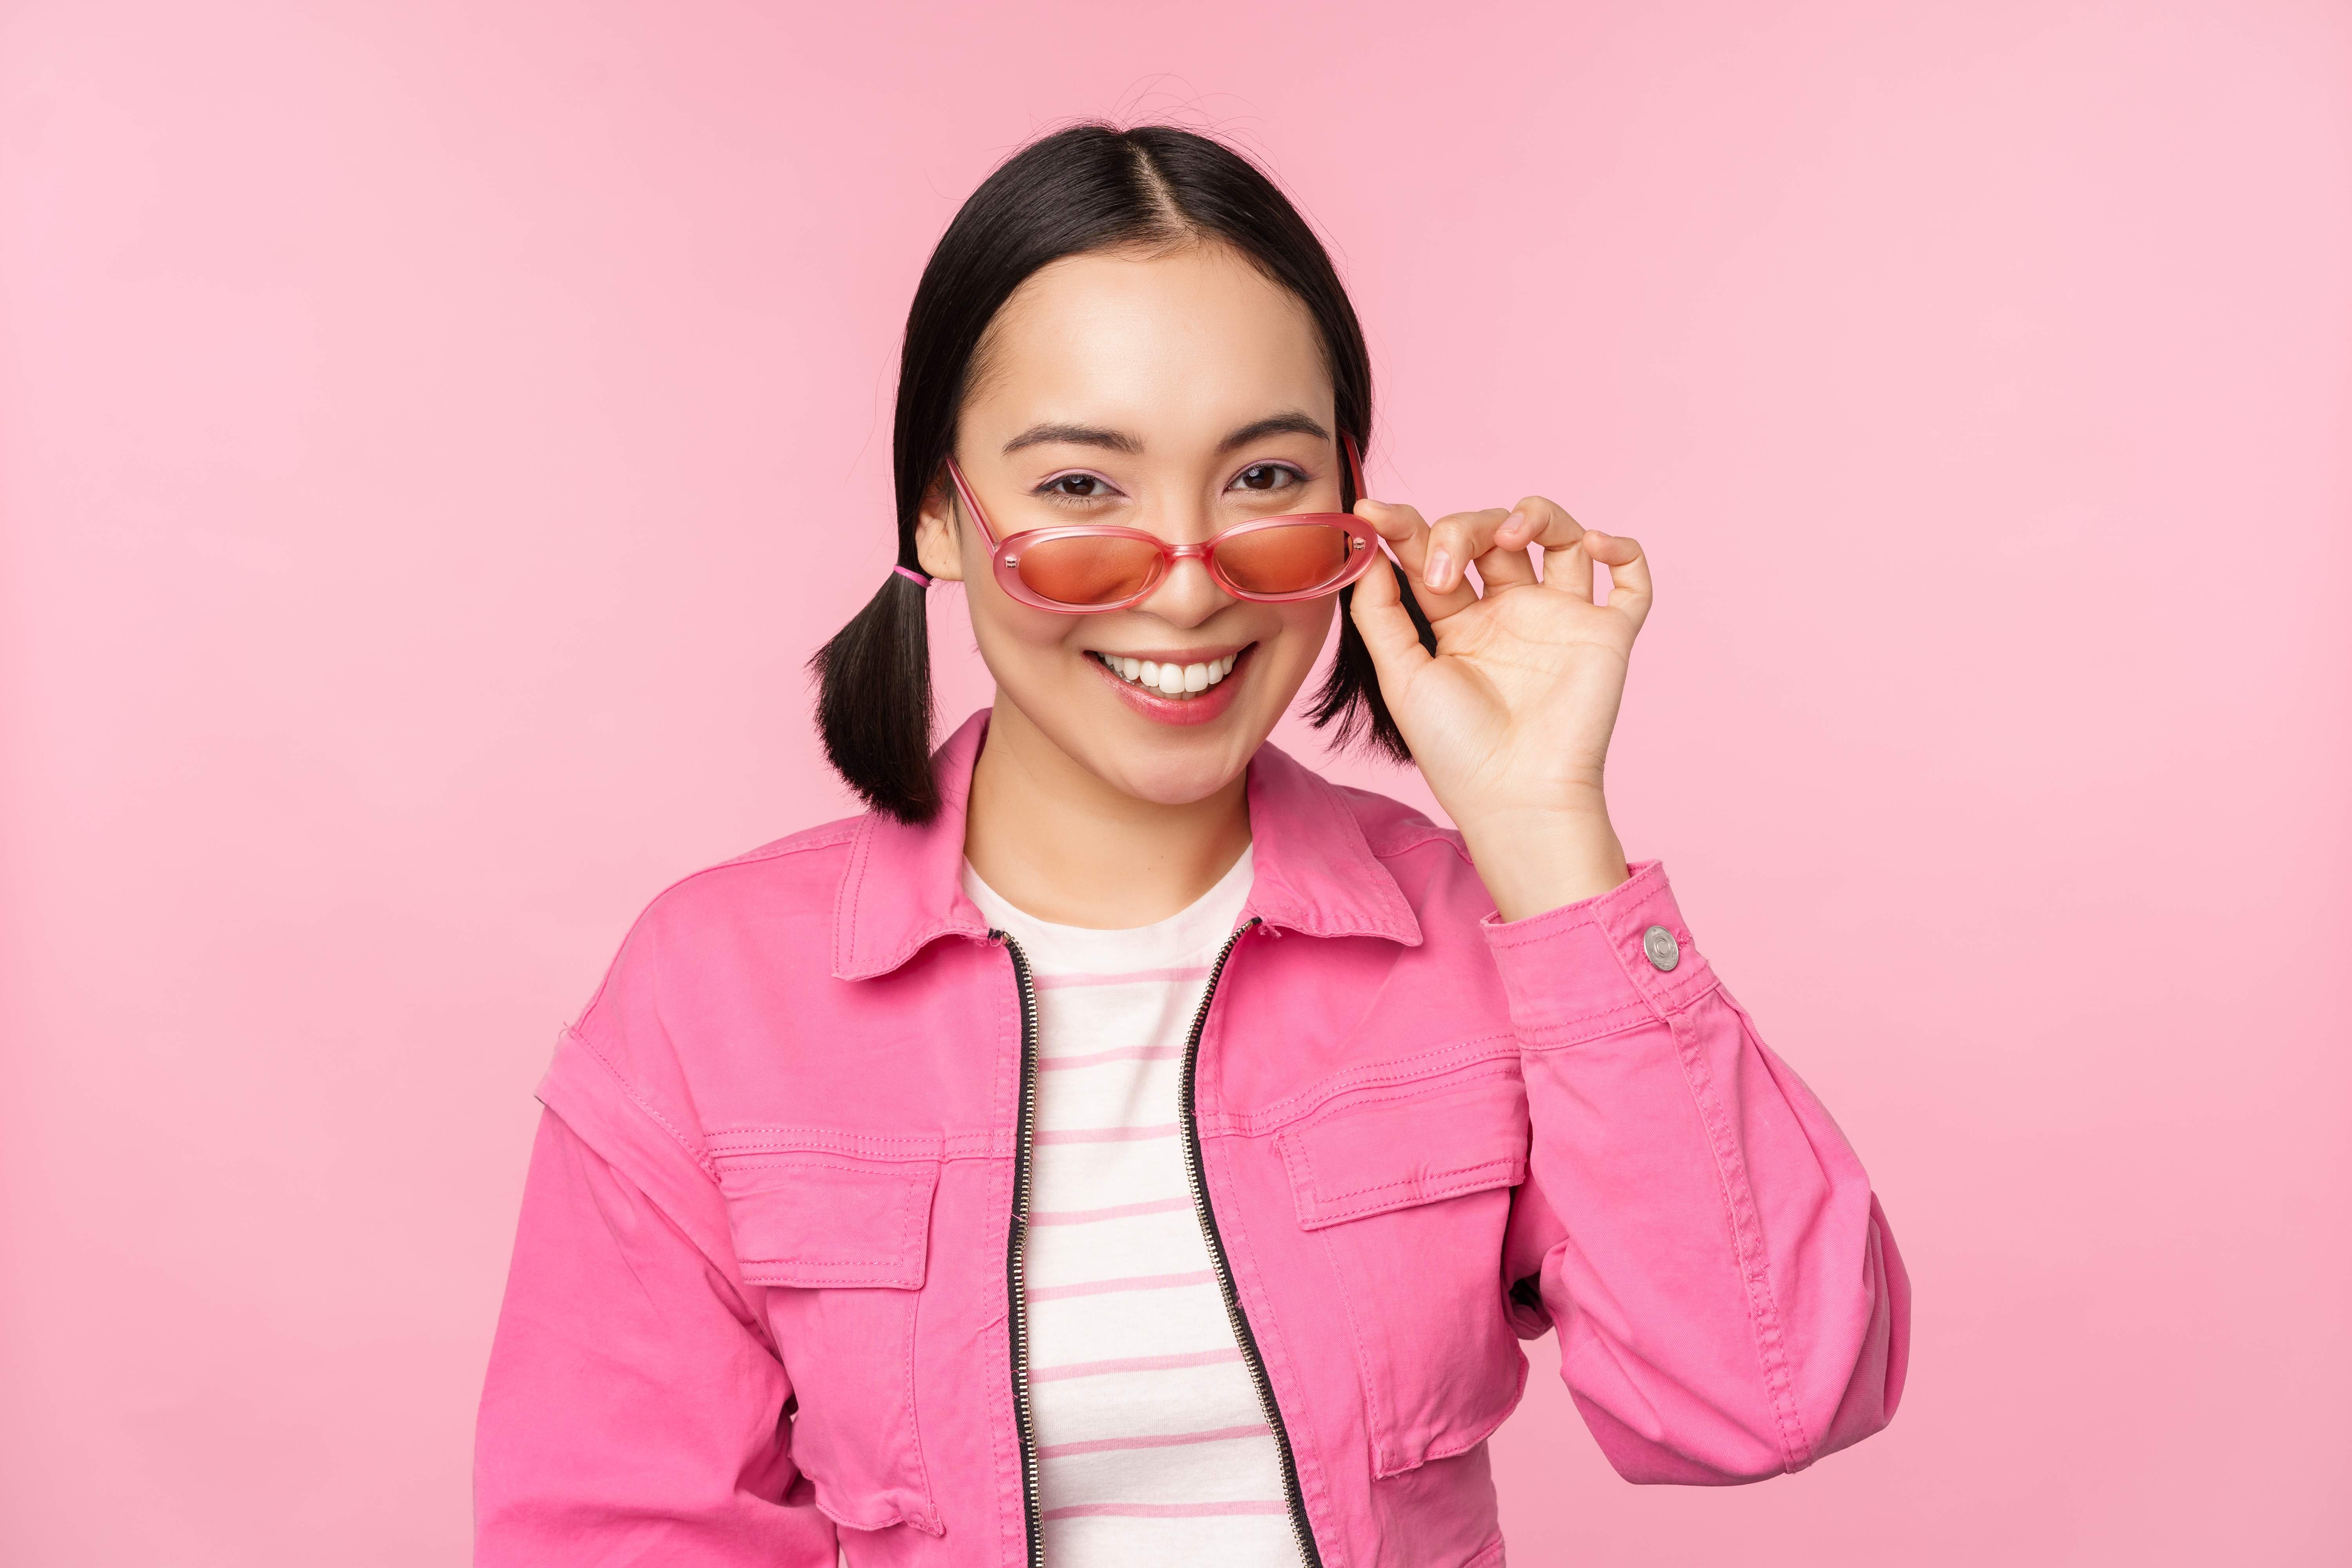 A woman shows off the cute pink sunglasses she got for her birthday.